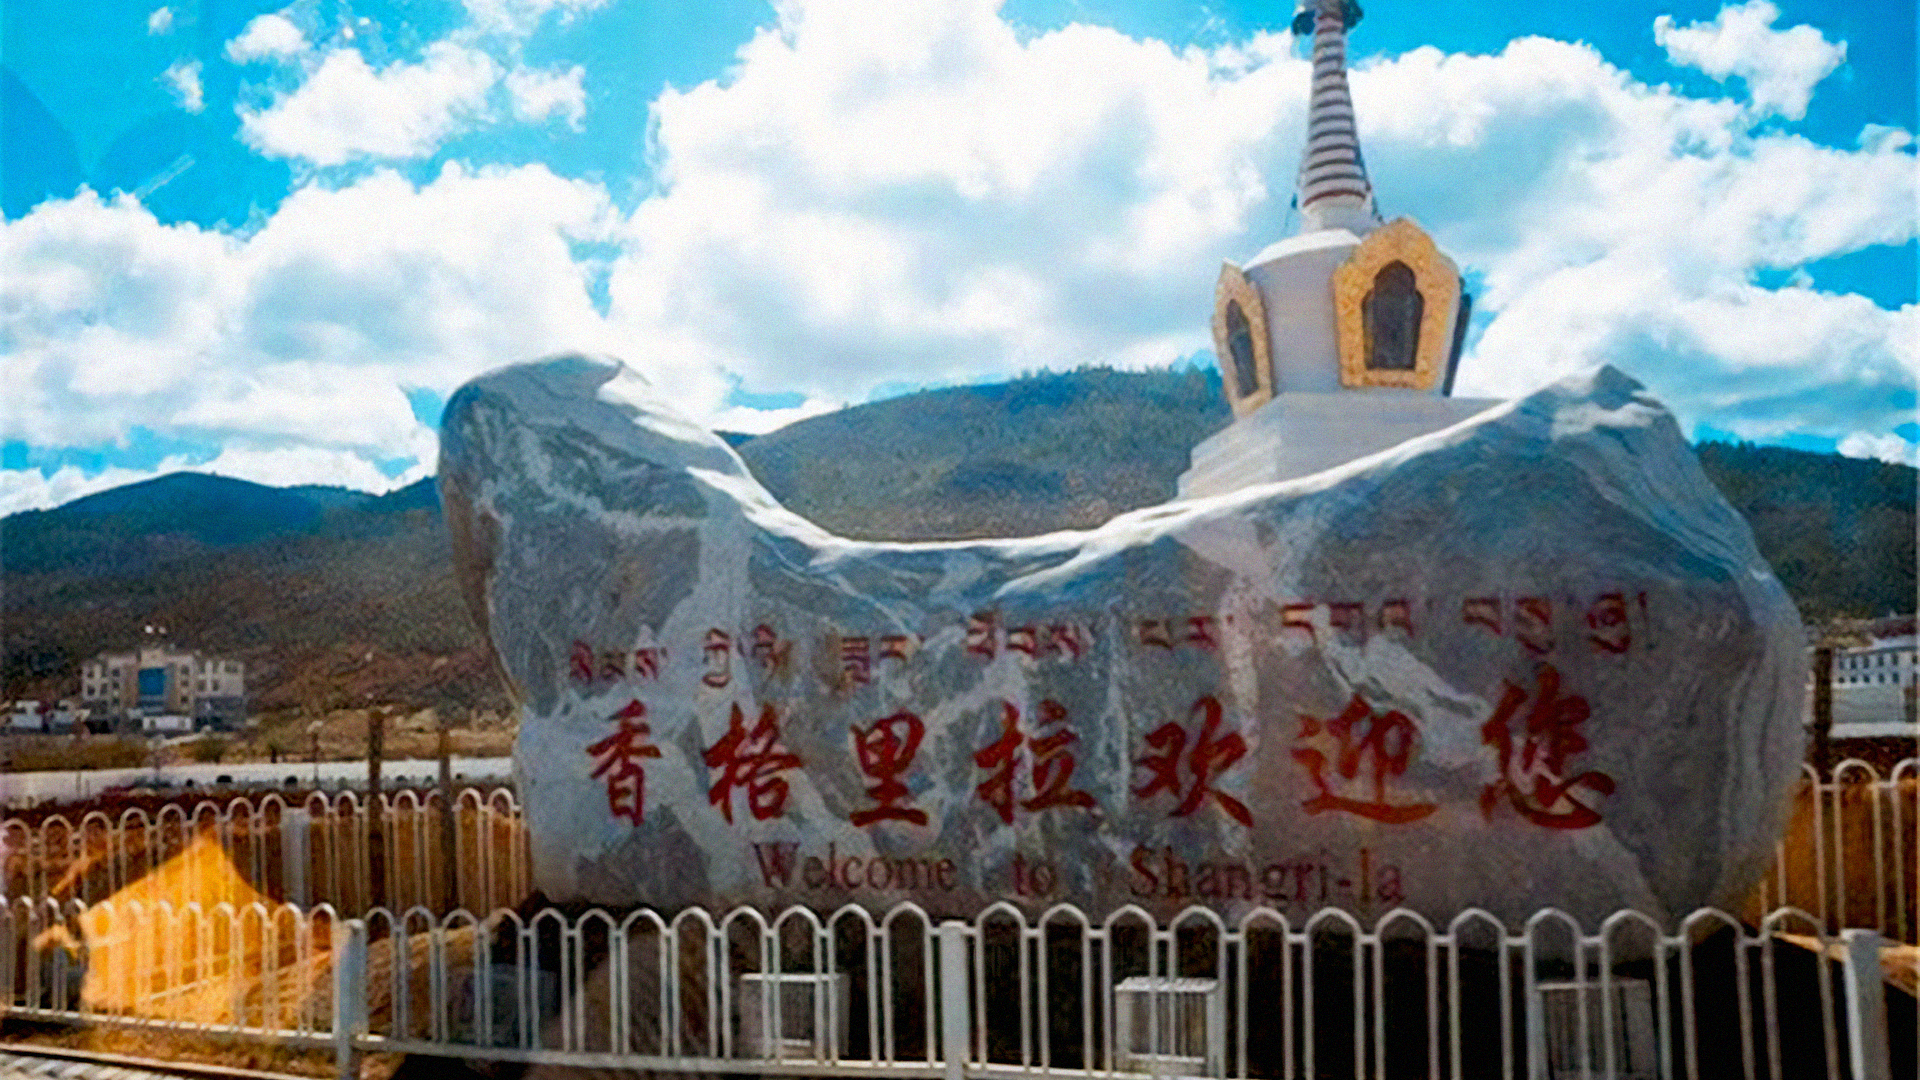 Sign welcoming visitors to Gyalthang County, also known as Shangri-La